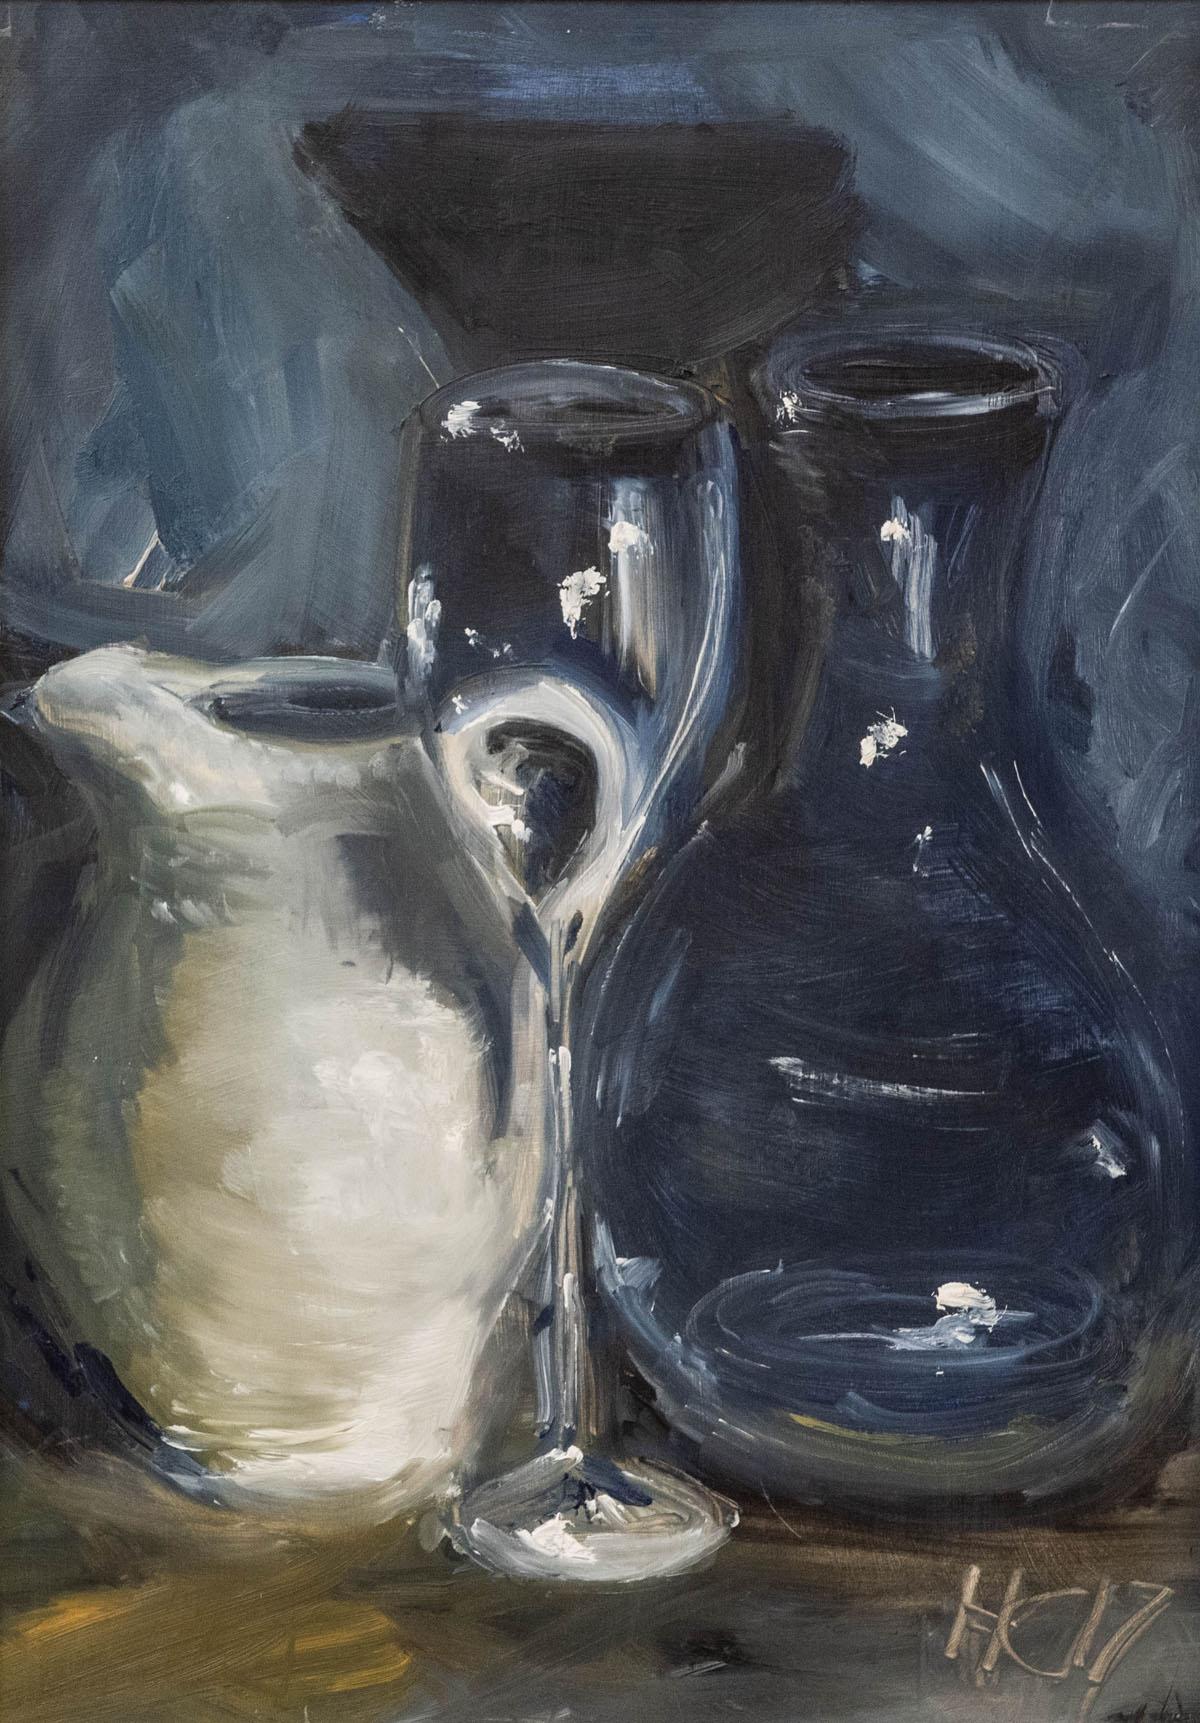 White Jug
Framed Original Oil Painting
Oil on Canvas Board
Canvas Size: H 50cm x W 35cm
Framed Size: H 65cm x W 50cm
Signed by the artist
Please note that the images of this piece in situ are only an example.

White Jug is an original oil painting